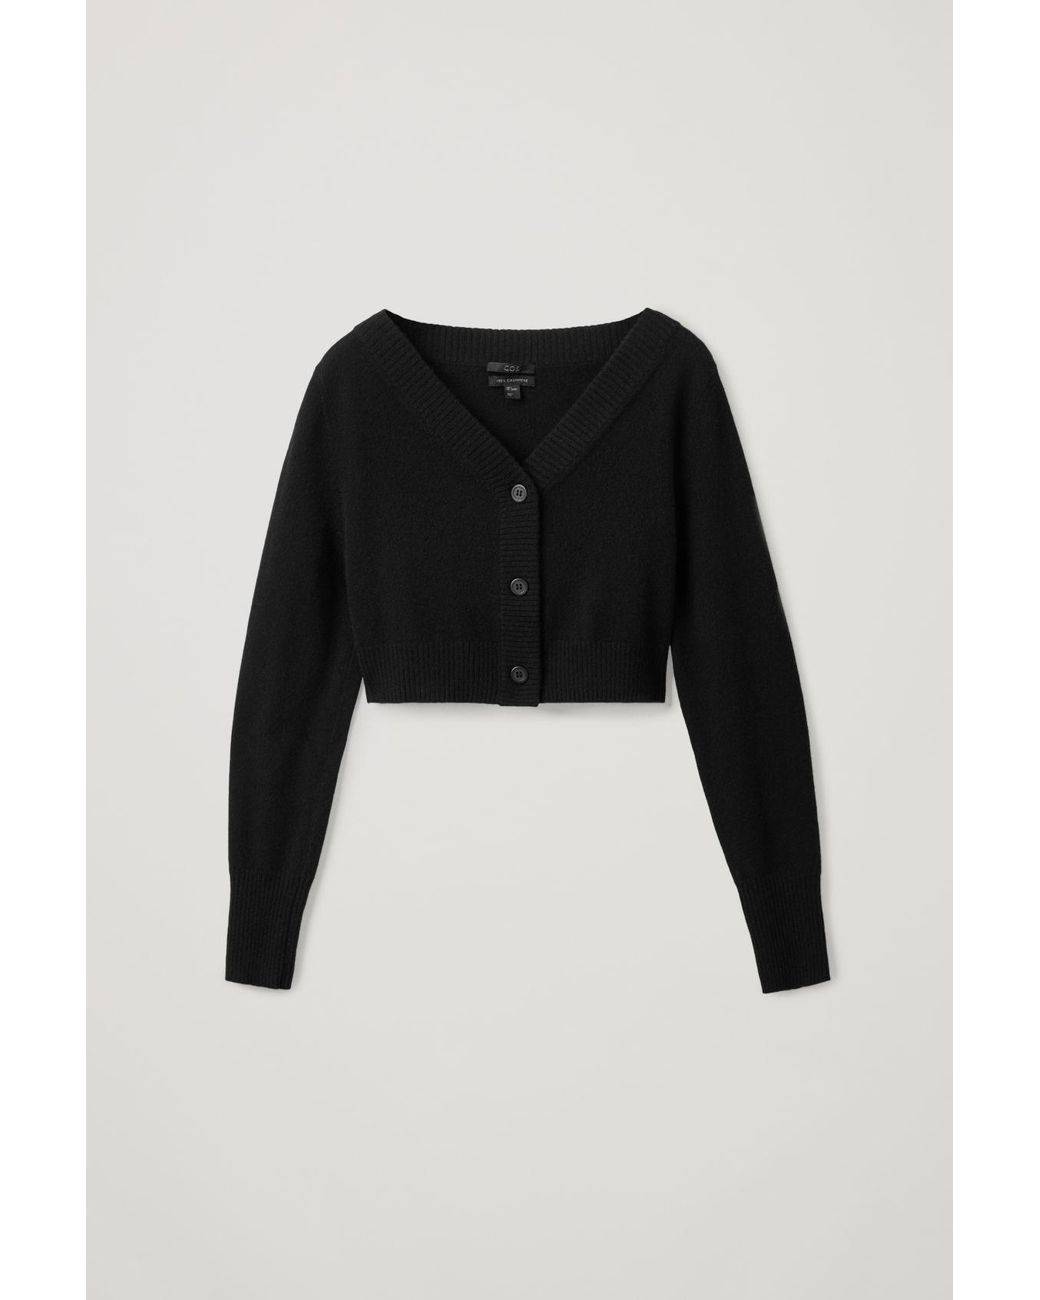 COS Cropped Cashmere Cardigan in Black | Lyst